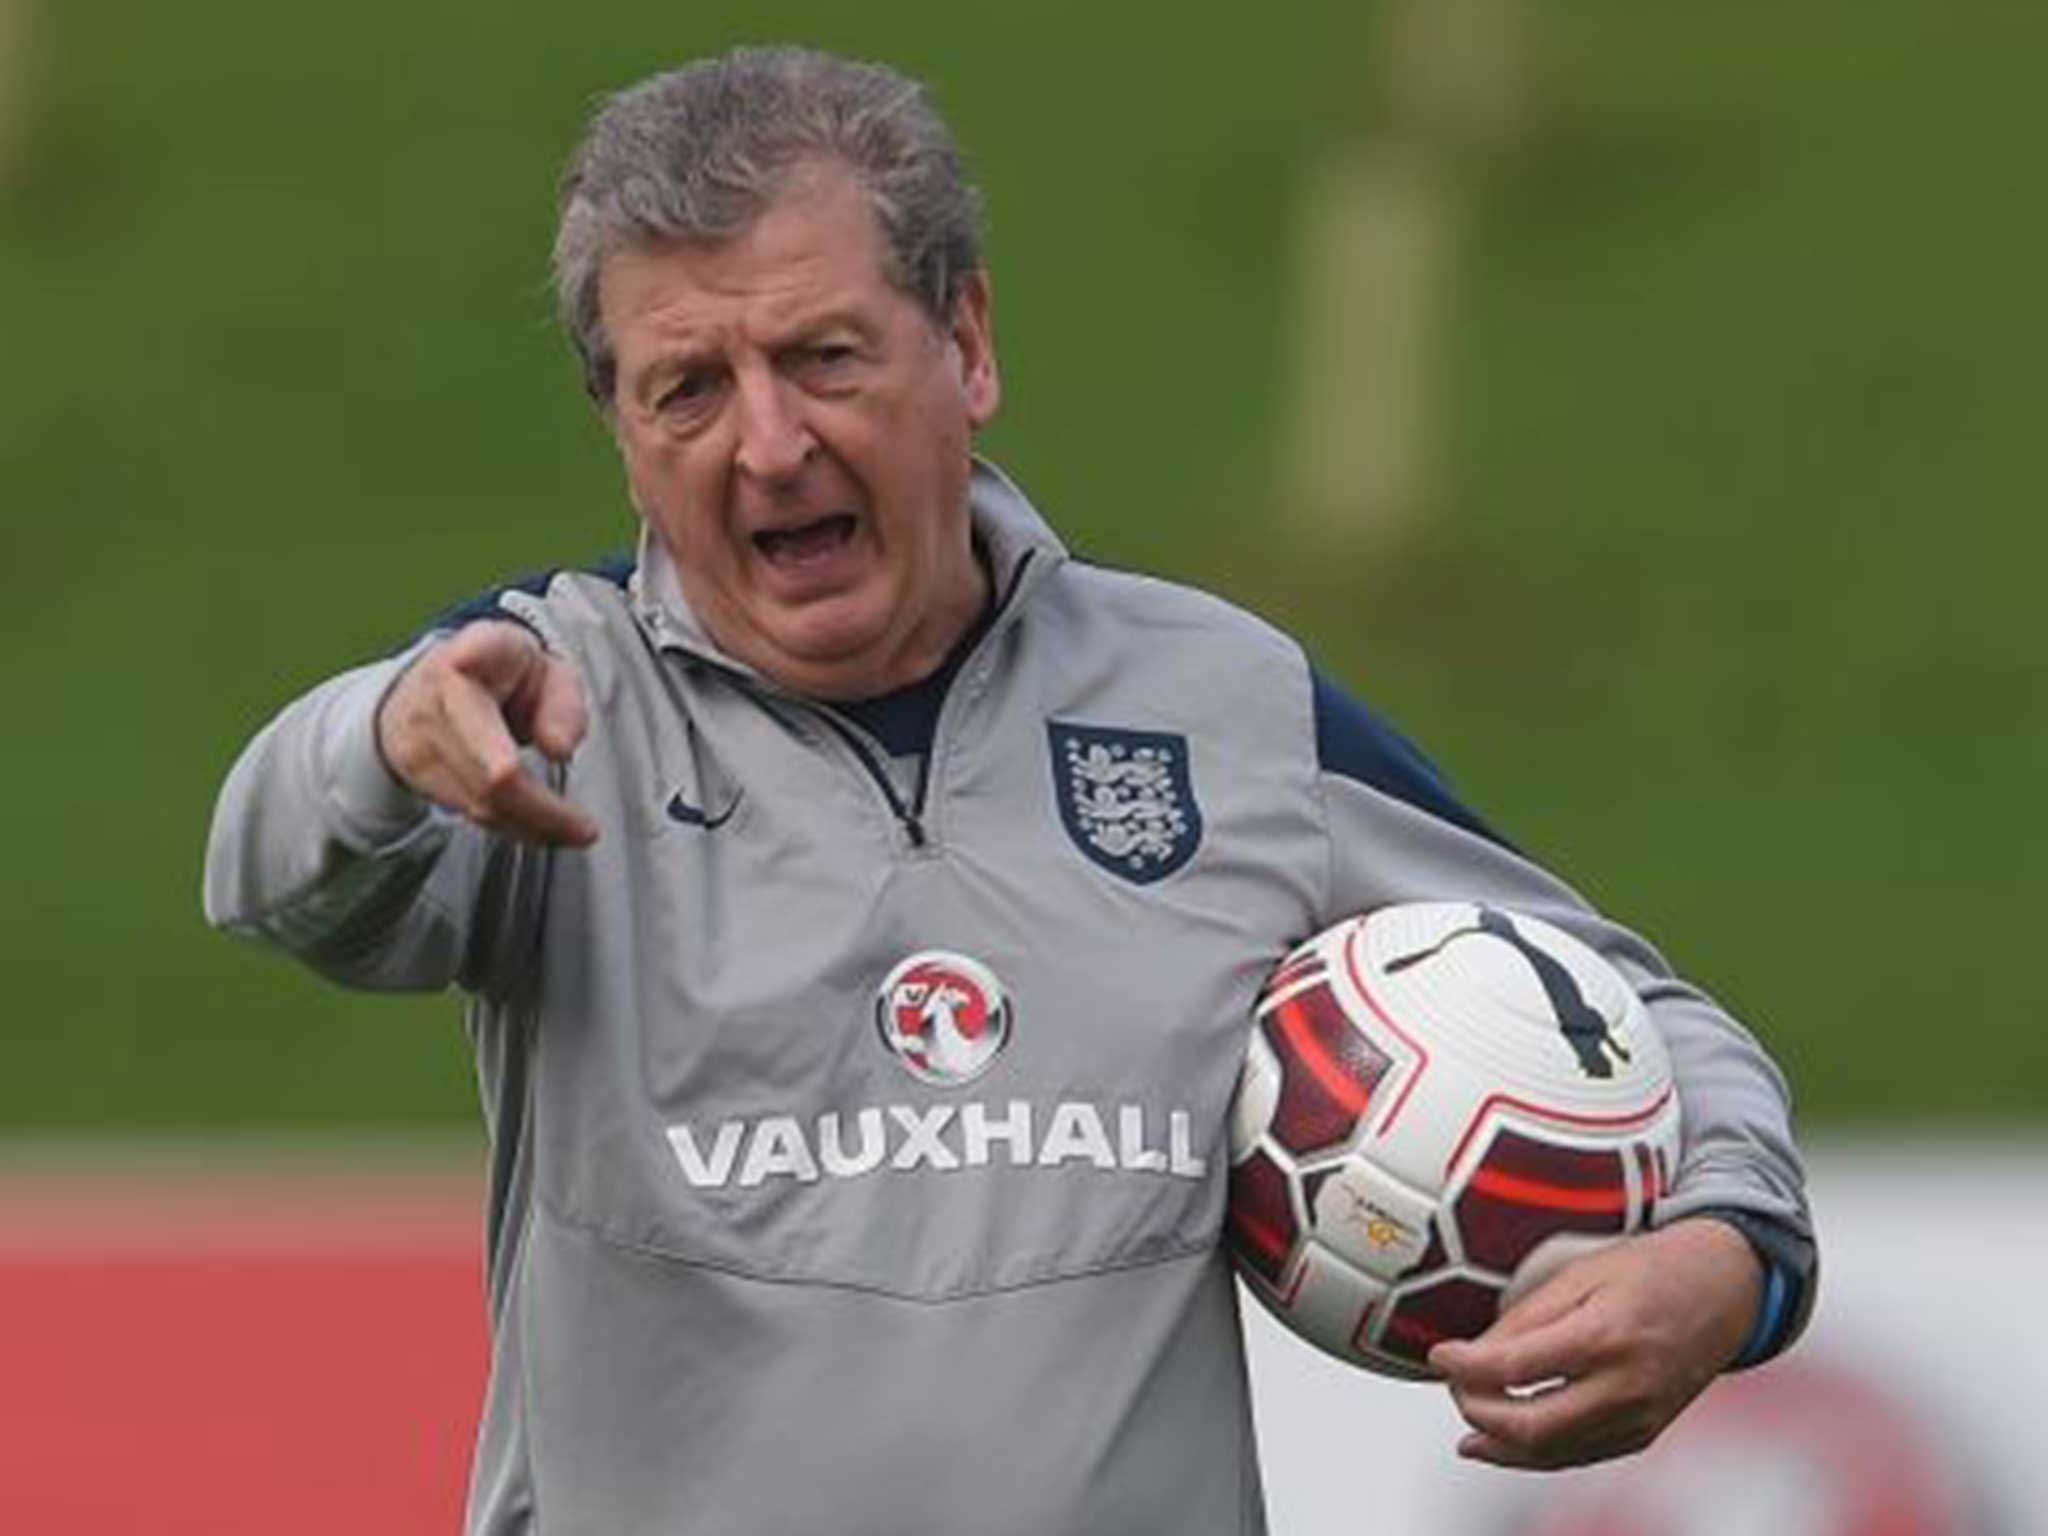 Hodgson giving the players plenty of sewer invective during a lacklustre drill